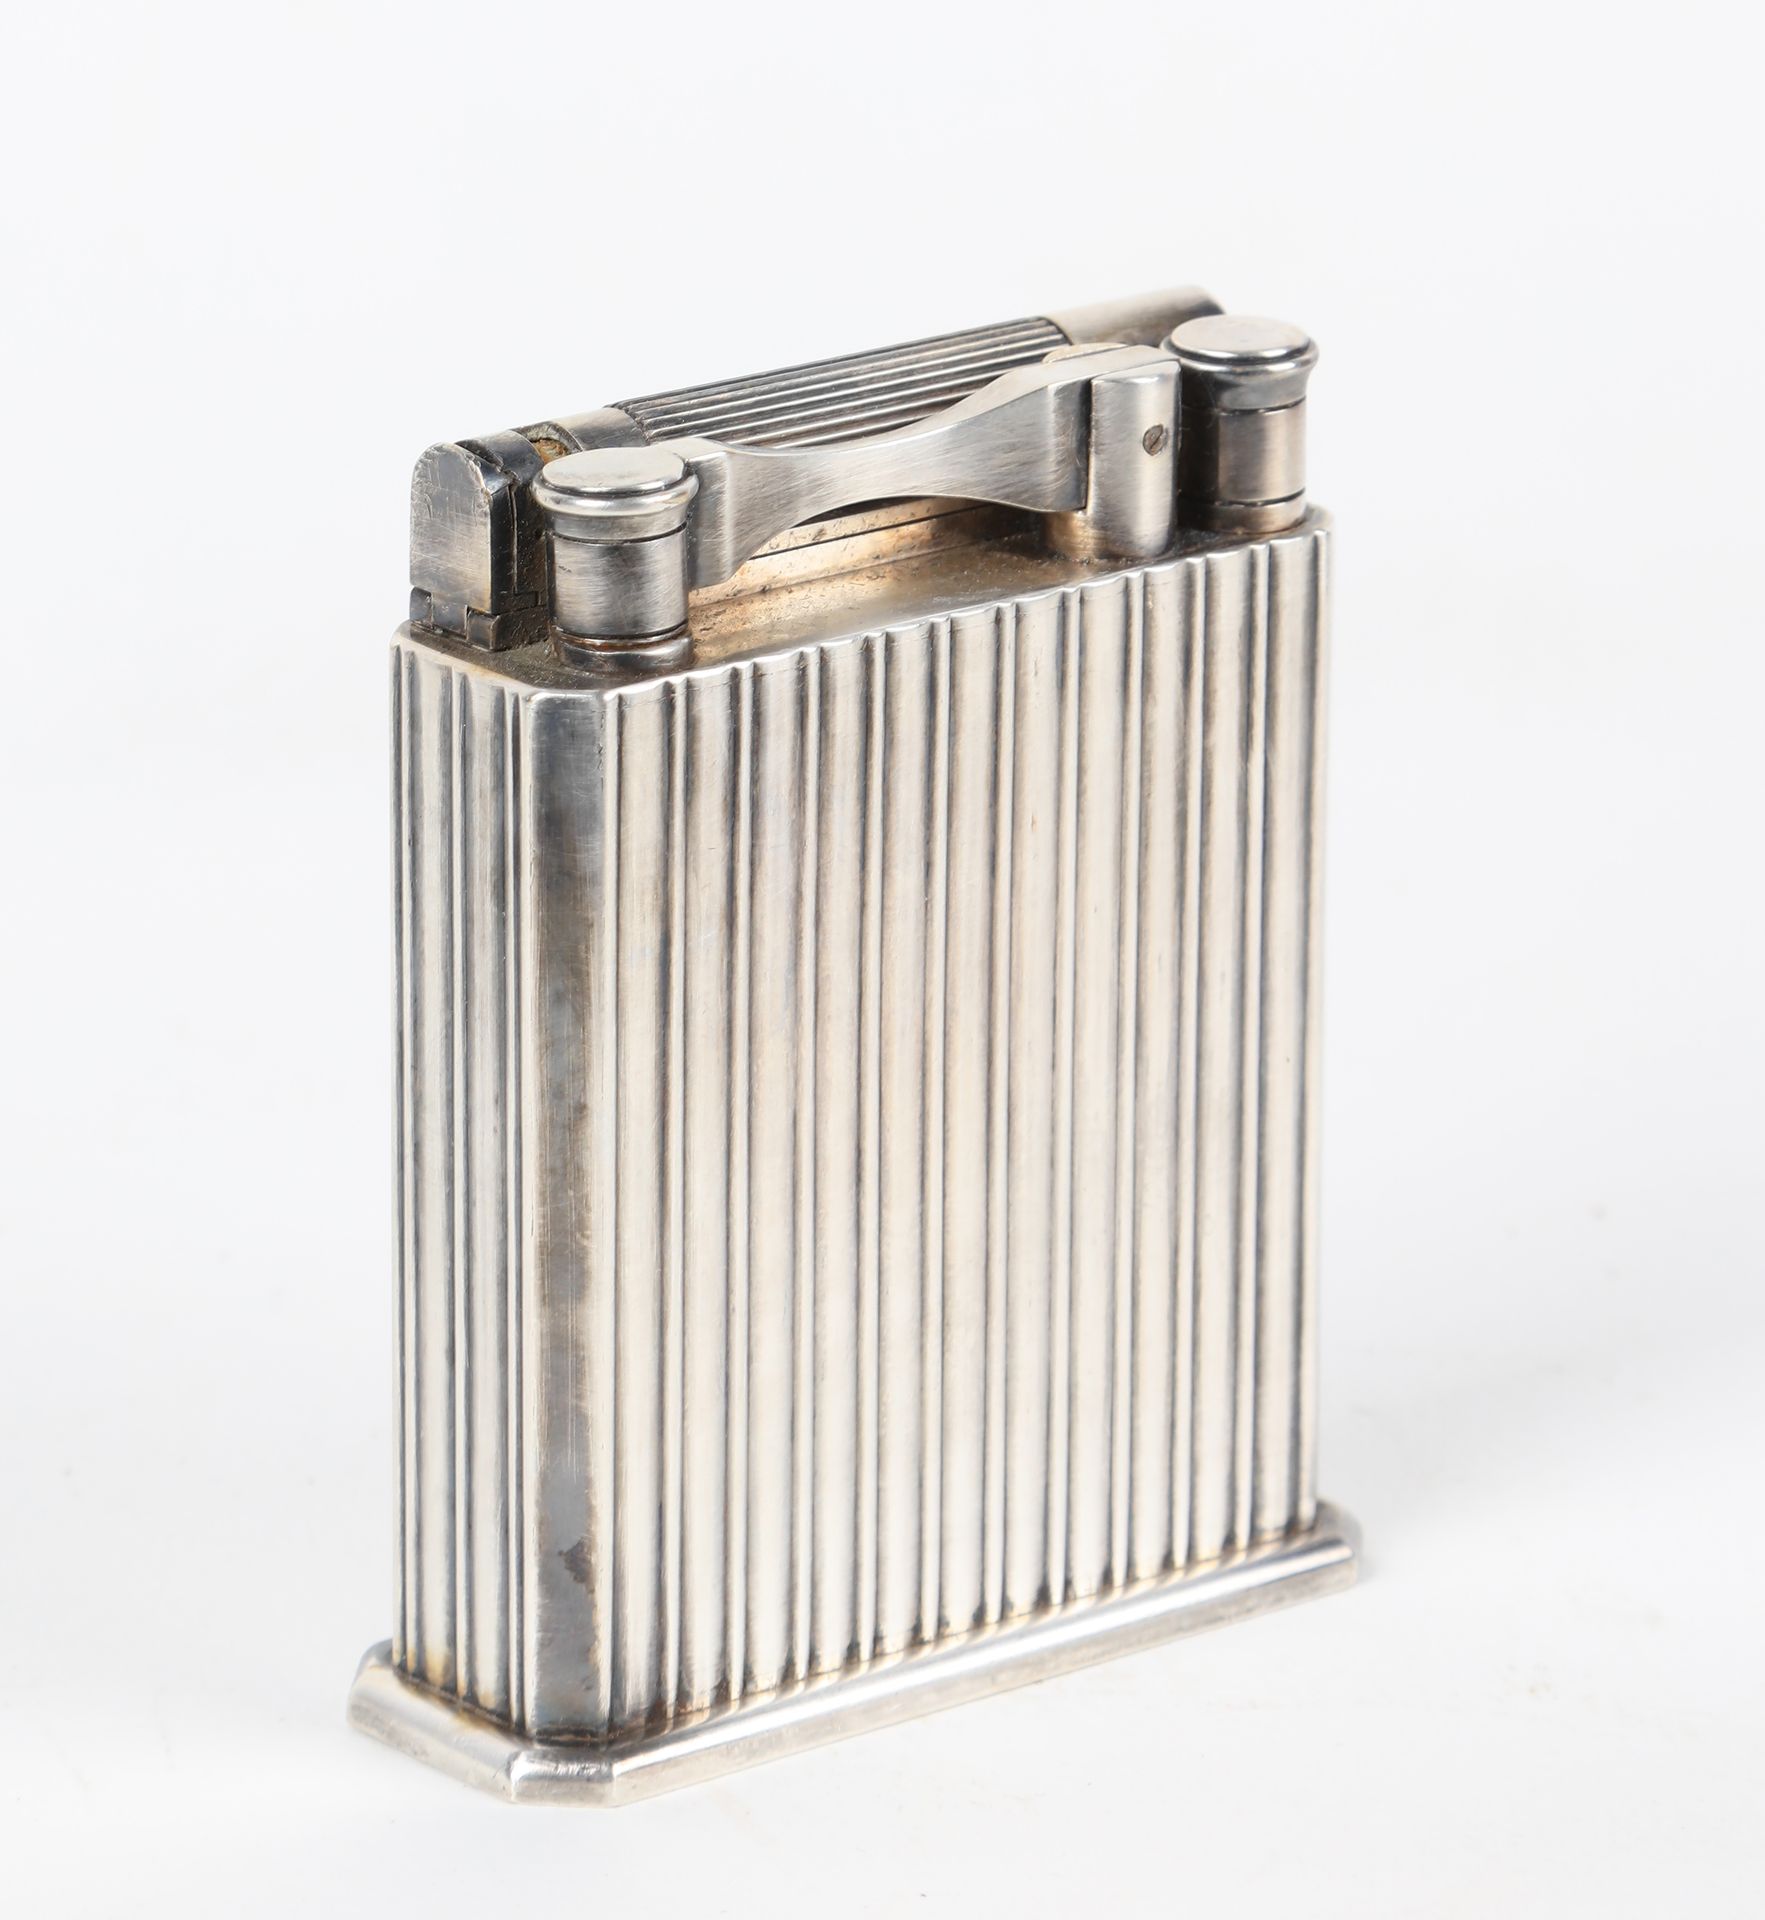 Null DUPONT, important lighter "Jeroboam", silver plated, 10X7,5X3